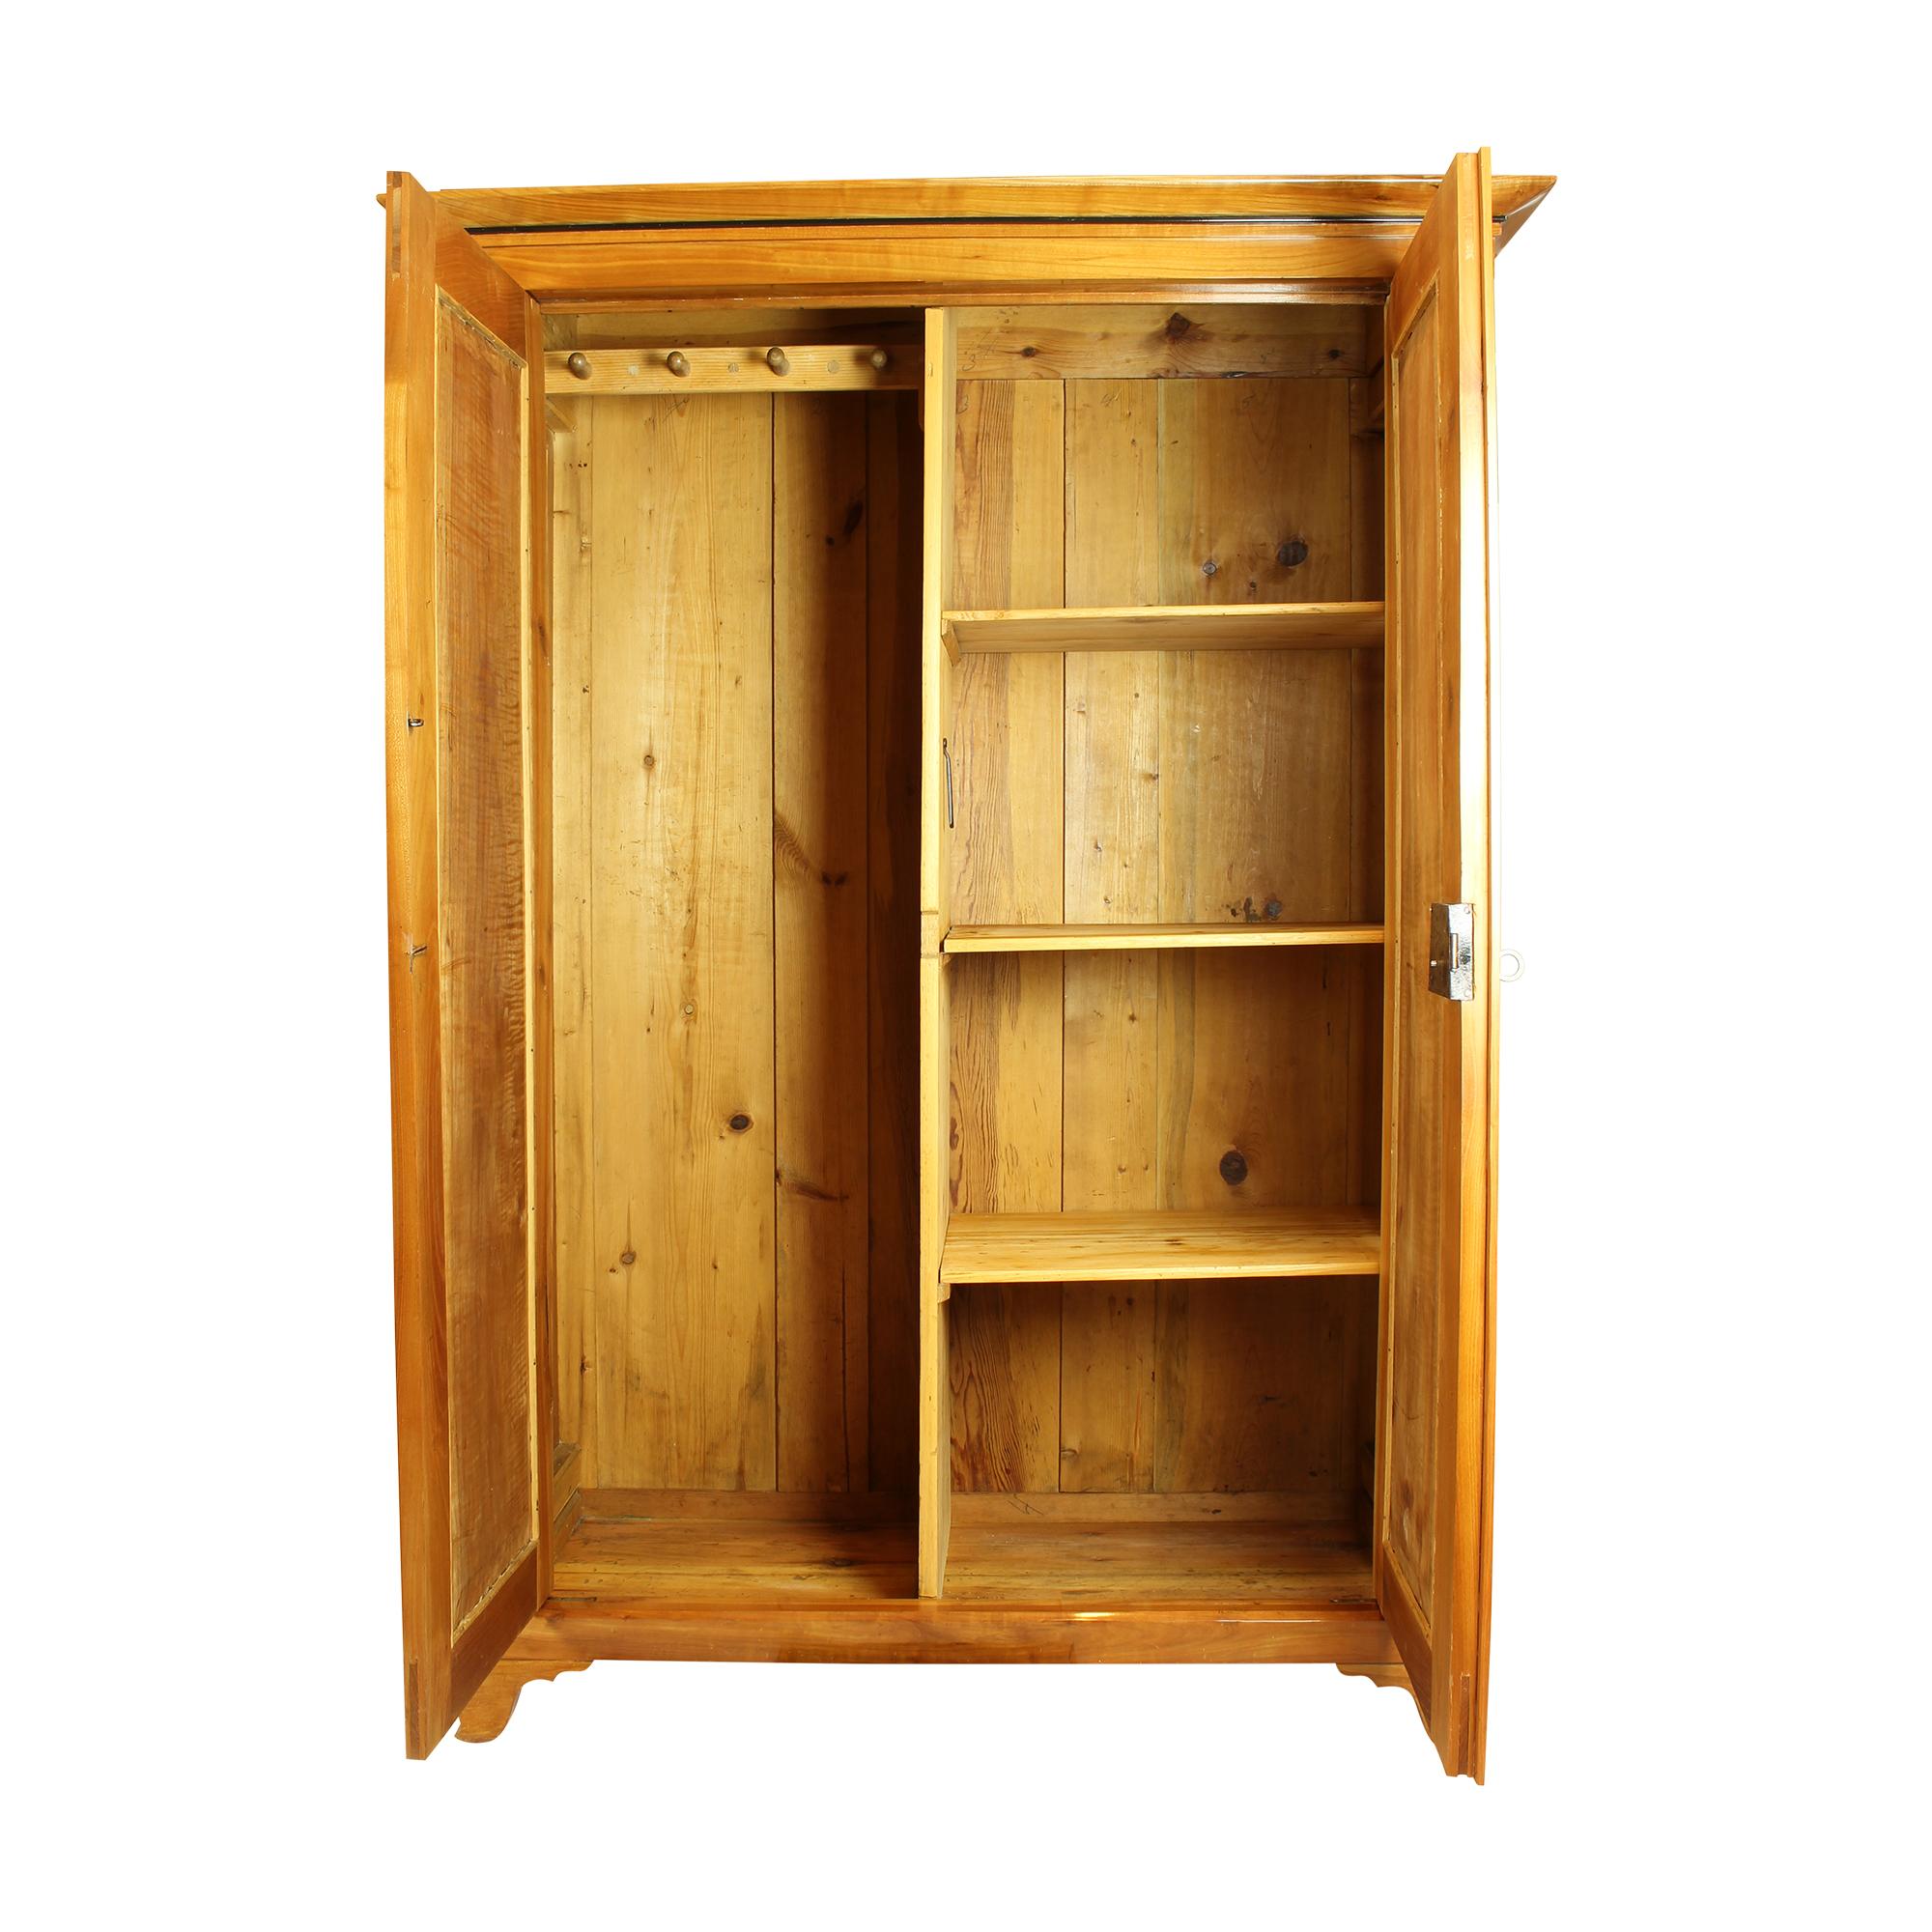 Beautiful wardrobe from the time of the Biedermeier circa 1840. Made of solid cherrywood. The wardrobe was lovingly restored by us. The wardrobe can be dismantled and shipped dismantled. An illustrated guide for the construction is enclosed. The